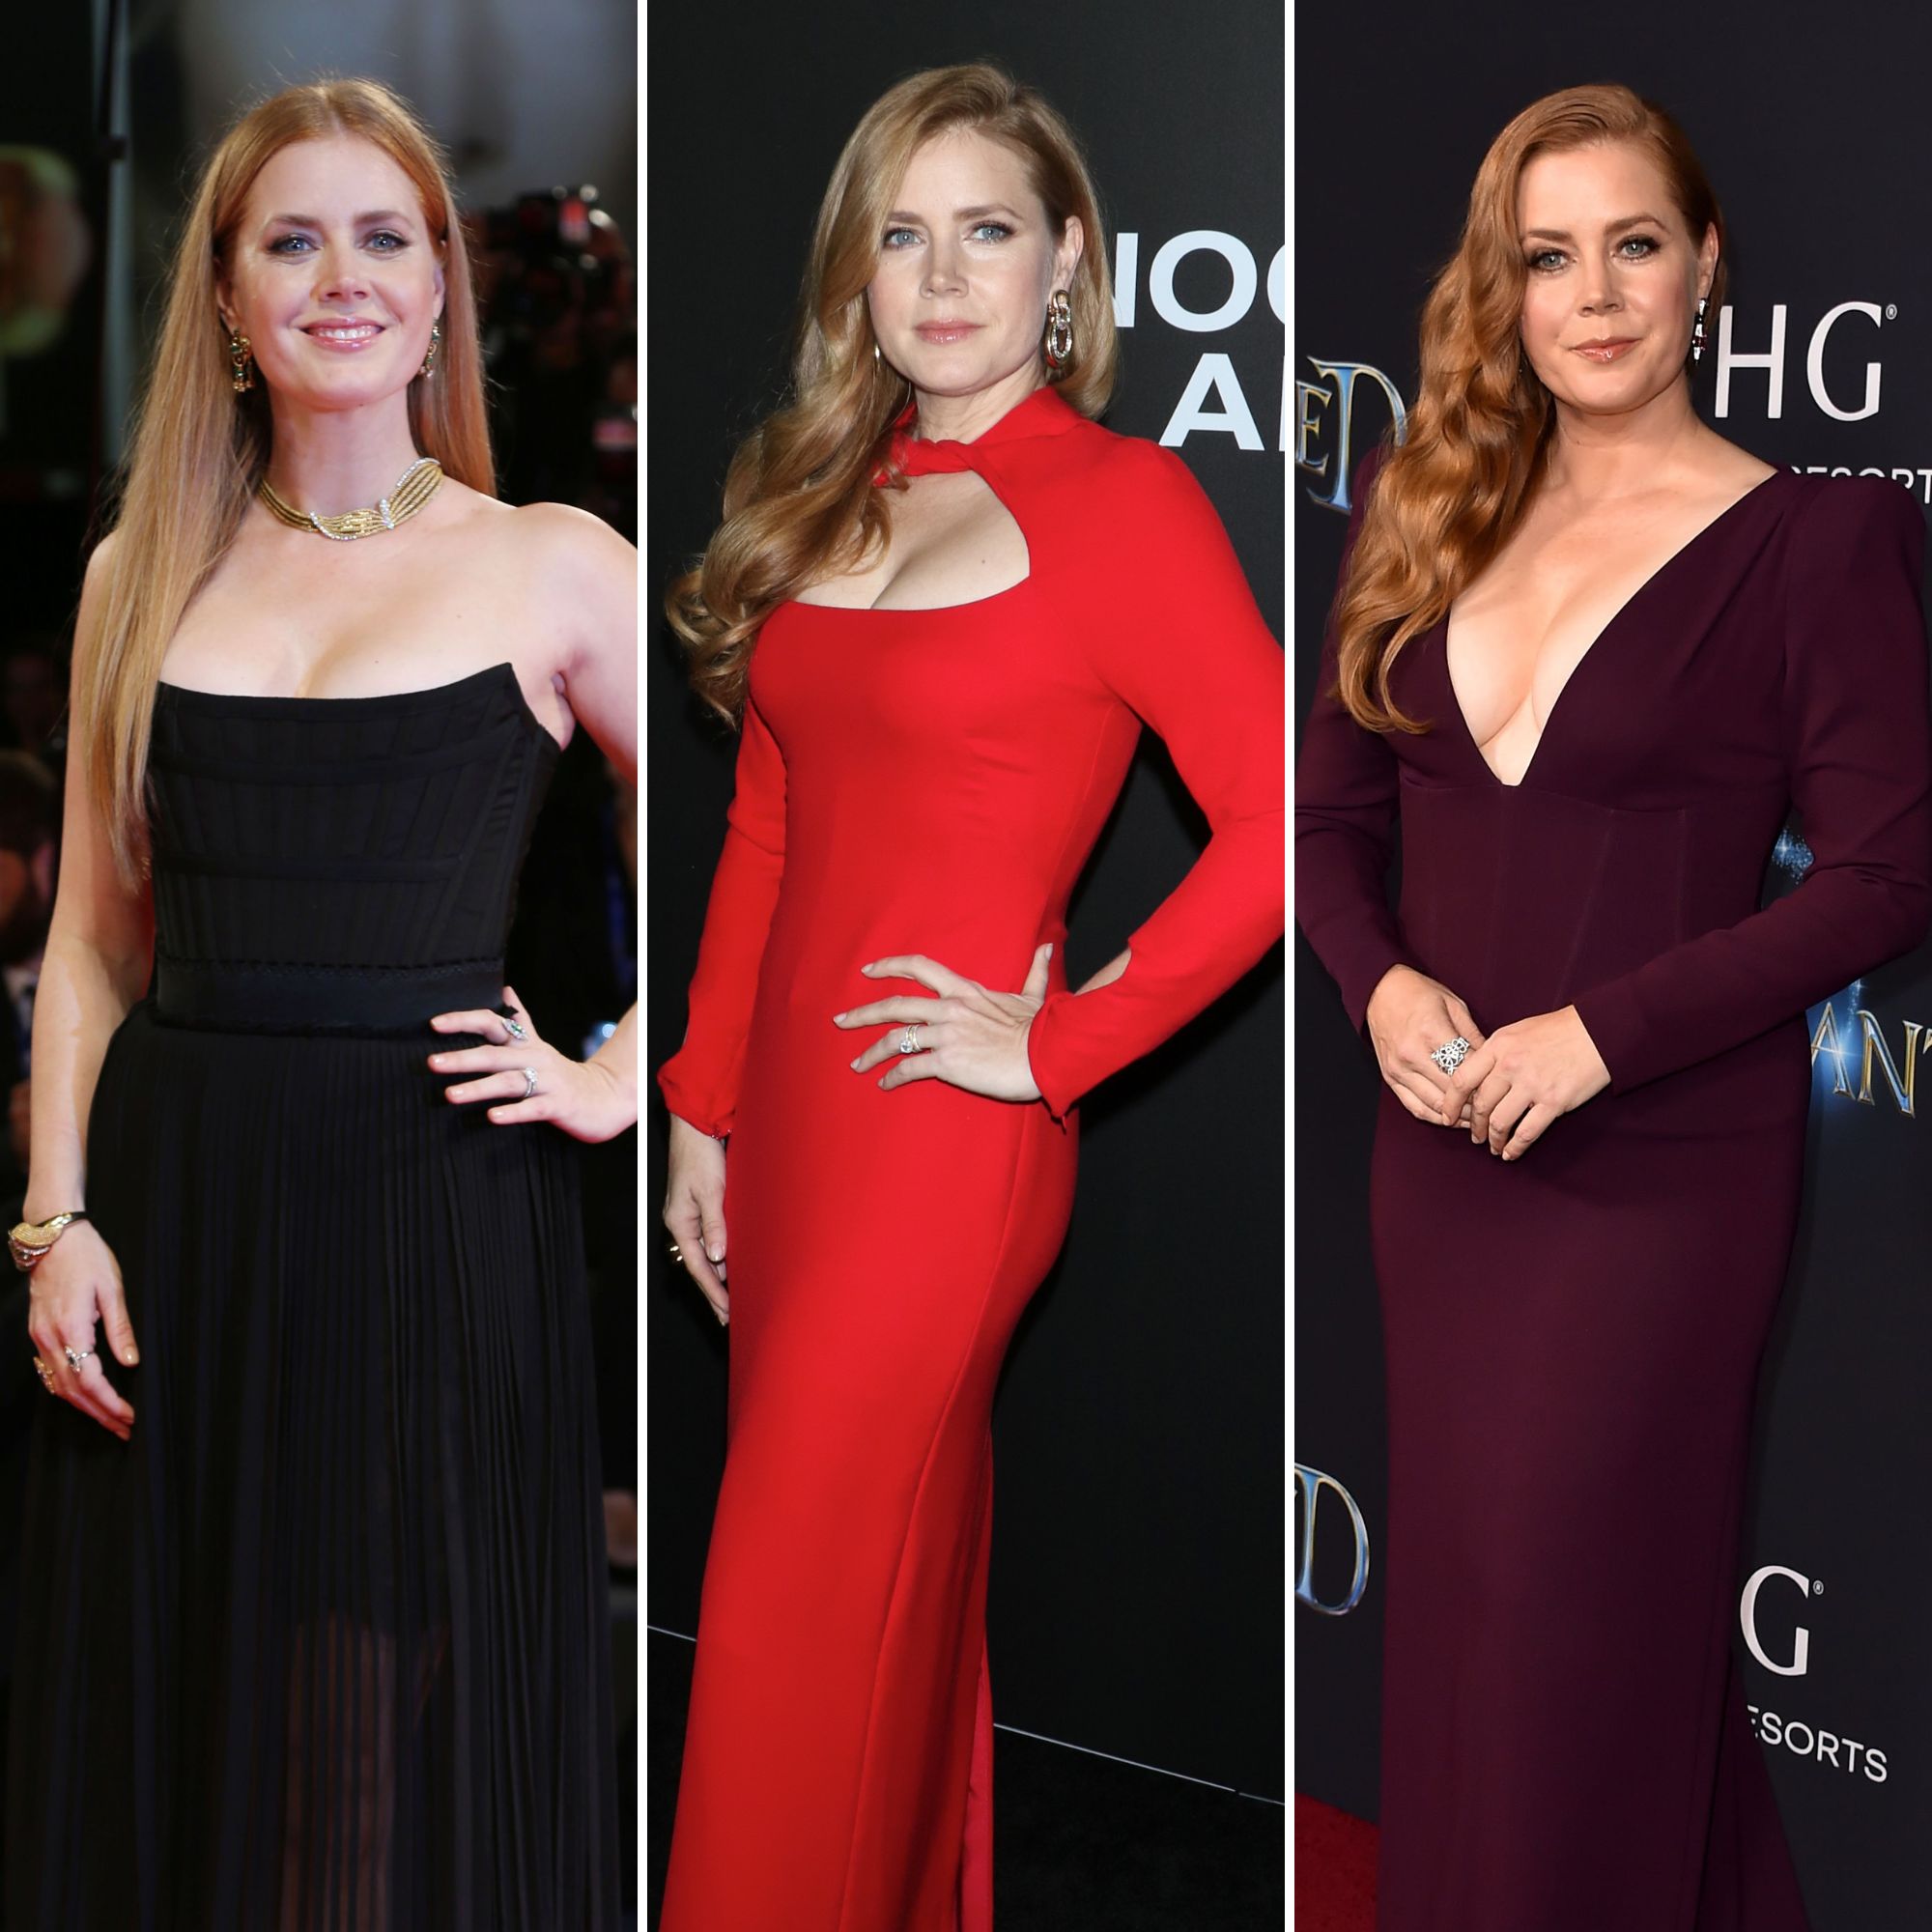 Amy Adams Hot Sexy Nude Tits - Amy Adams Braless Photos: Pictures of Actress Without a Bra | Life & Style